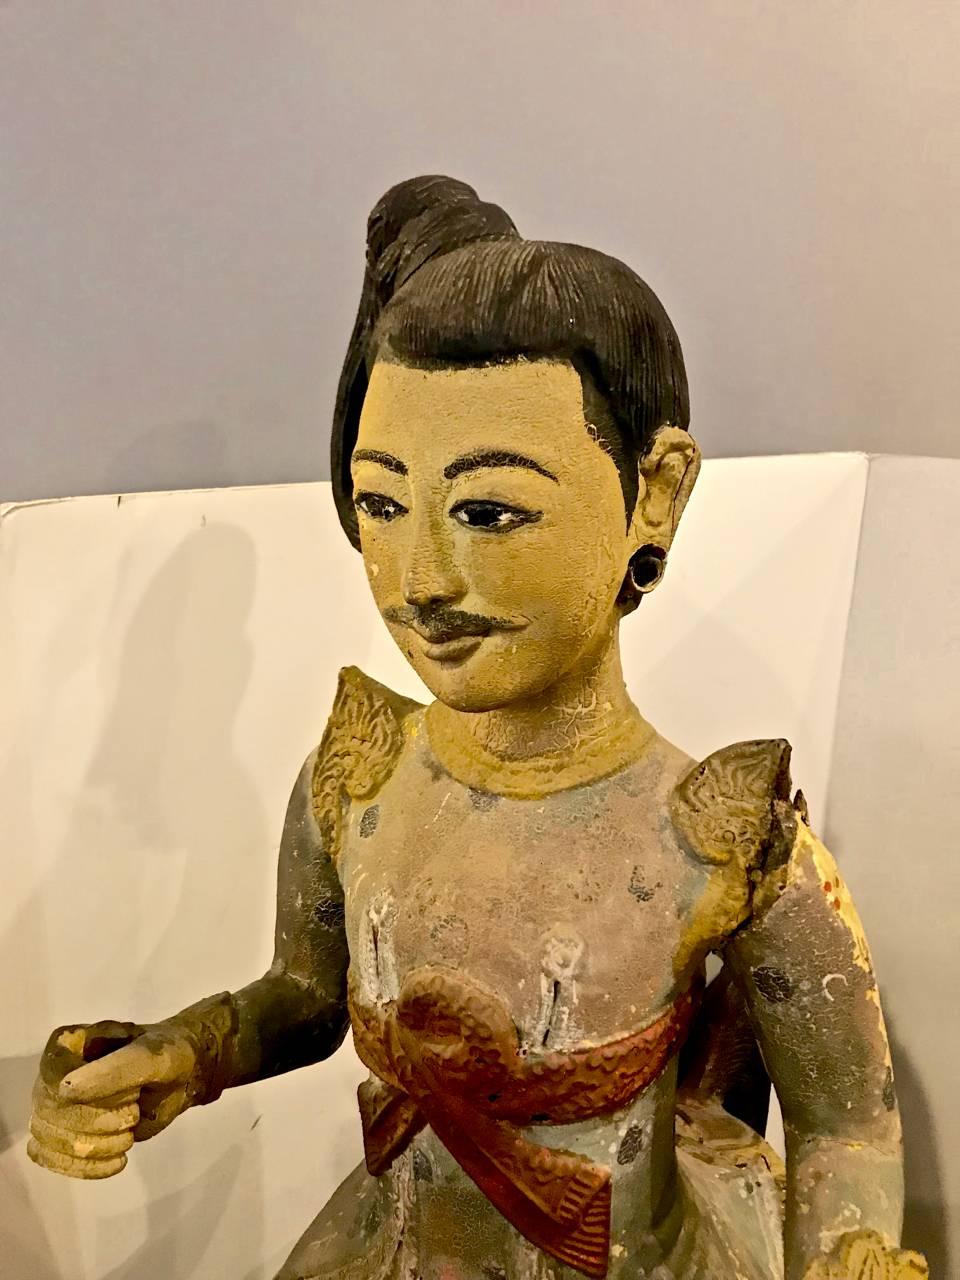 This is an unusually large Burmese mounted Royal Figure or Nat that dates to the late 19th century or early 20th century. The figural group retains all of its original carved elements, but has been restored at various times, including being